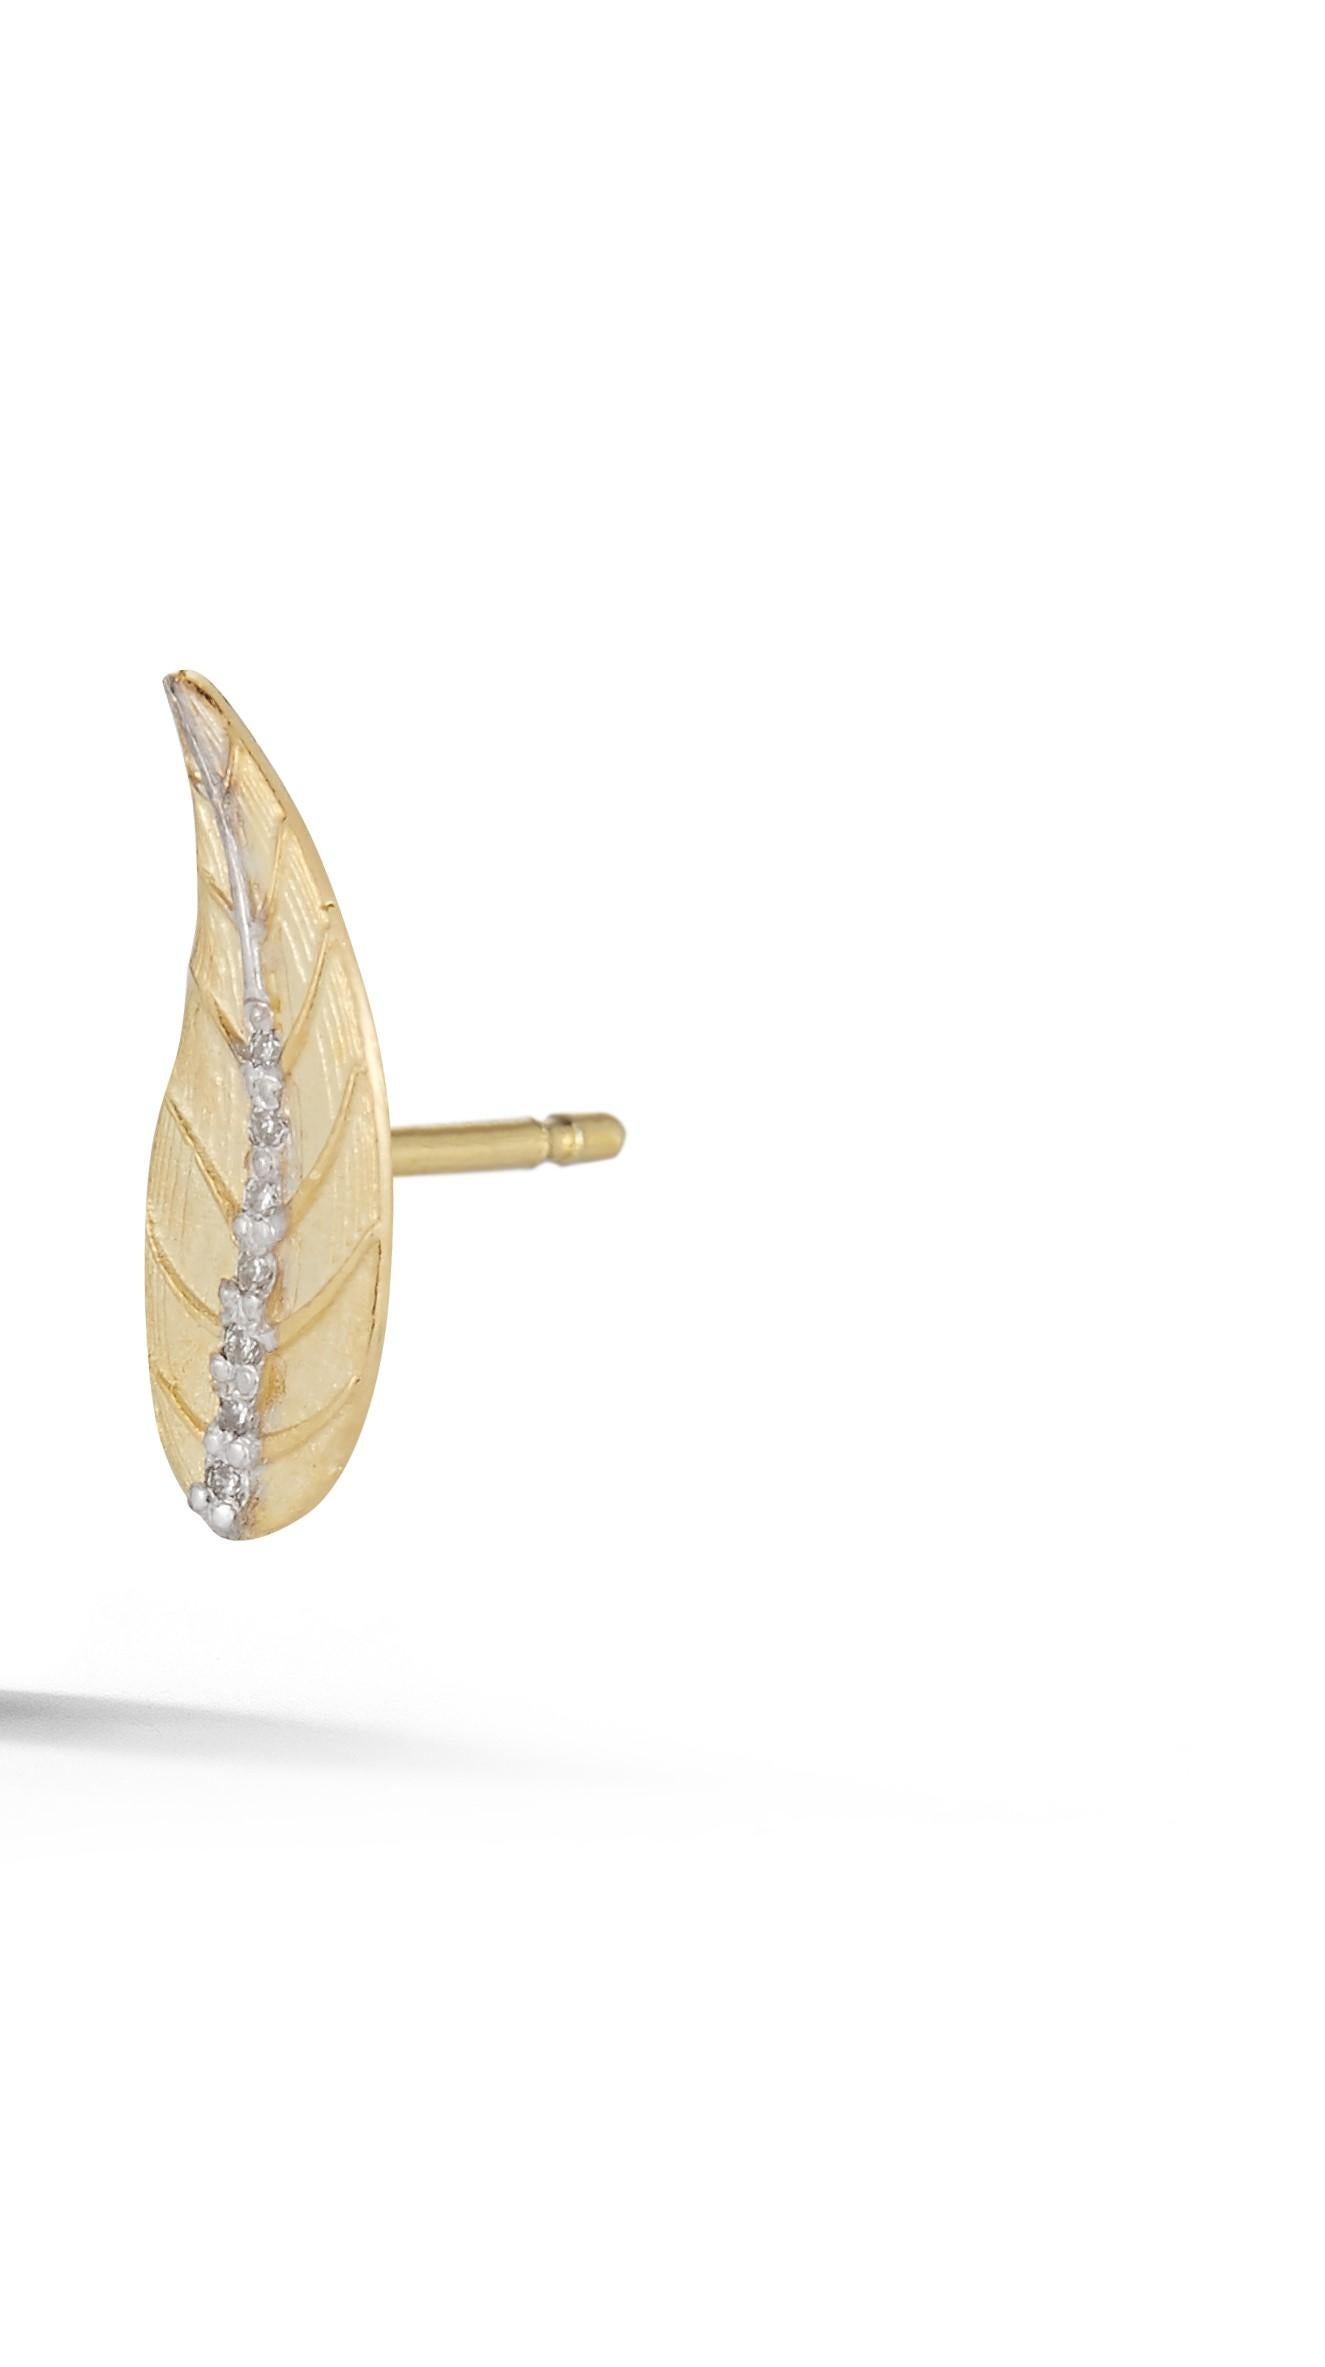 14 Karat Yellow Gold Hand-Crafted Etched and Matte-Finished Climber Leaf Earrings, Accented with 0.06 Carats of Pave Set Diamond Veins.  Post-with-Friction Closures.
